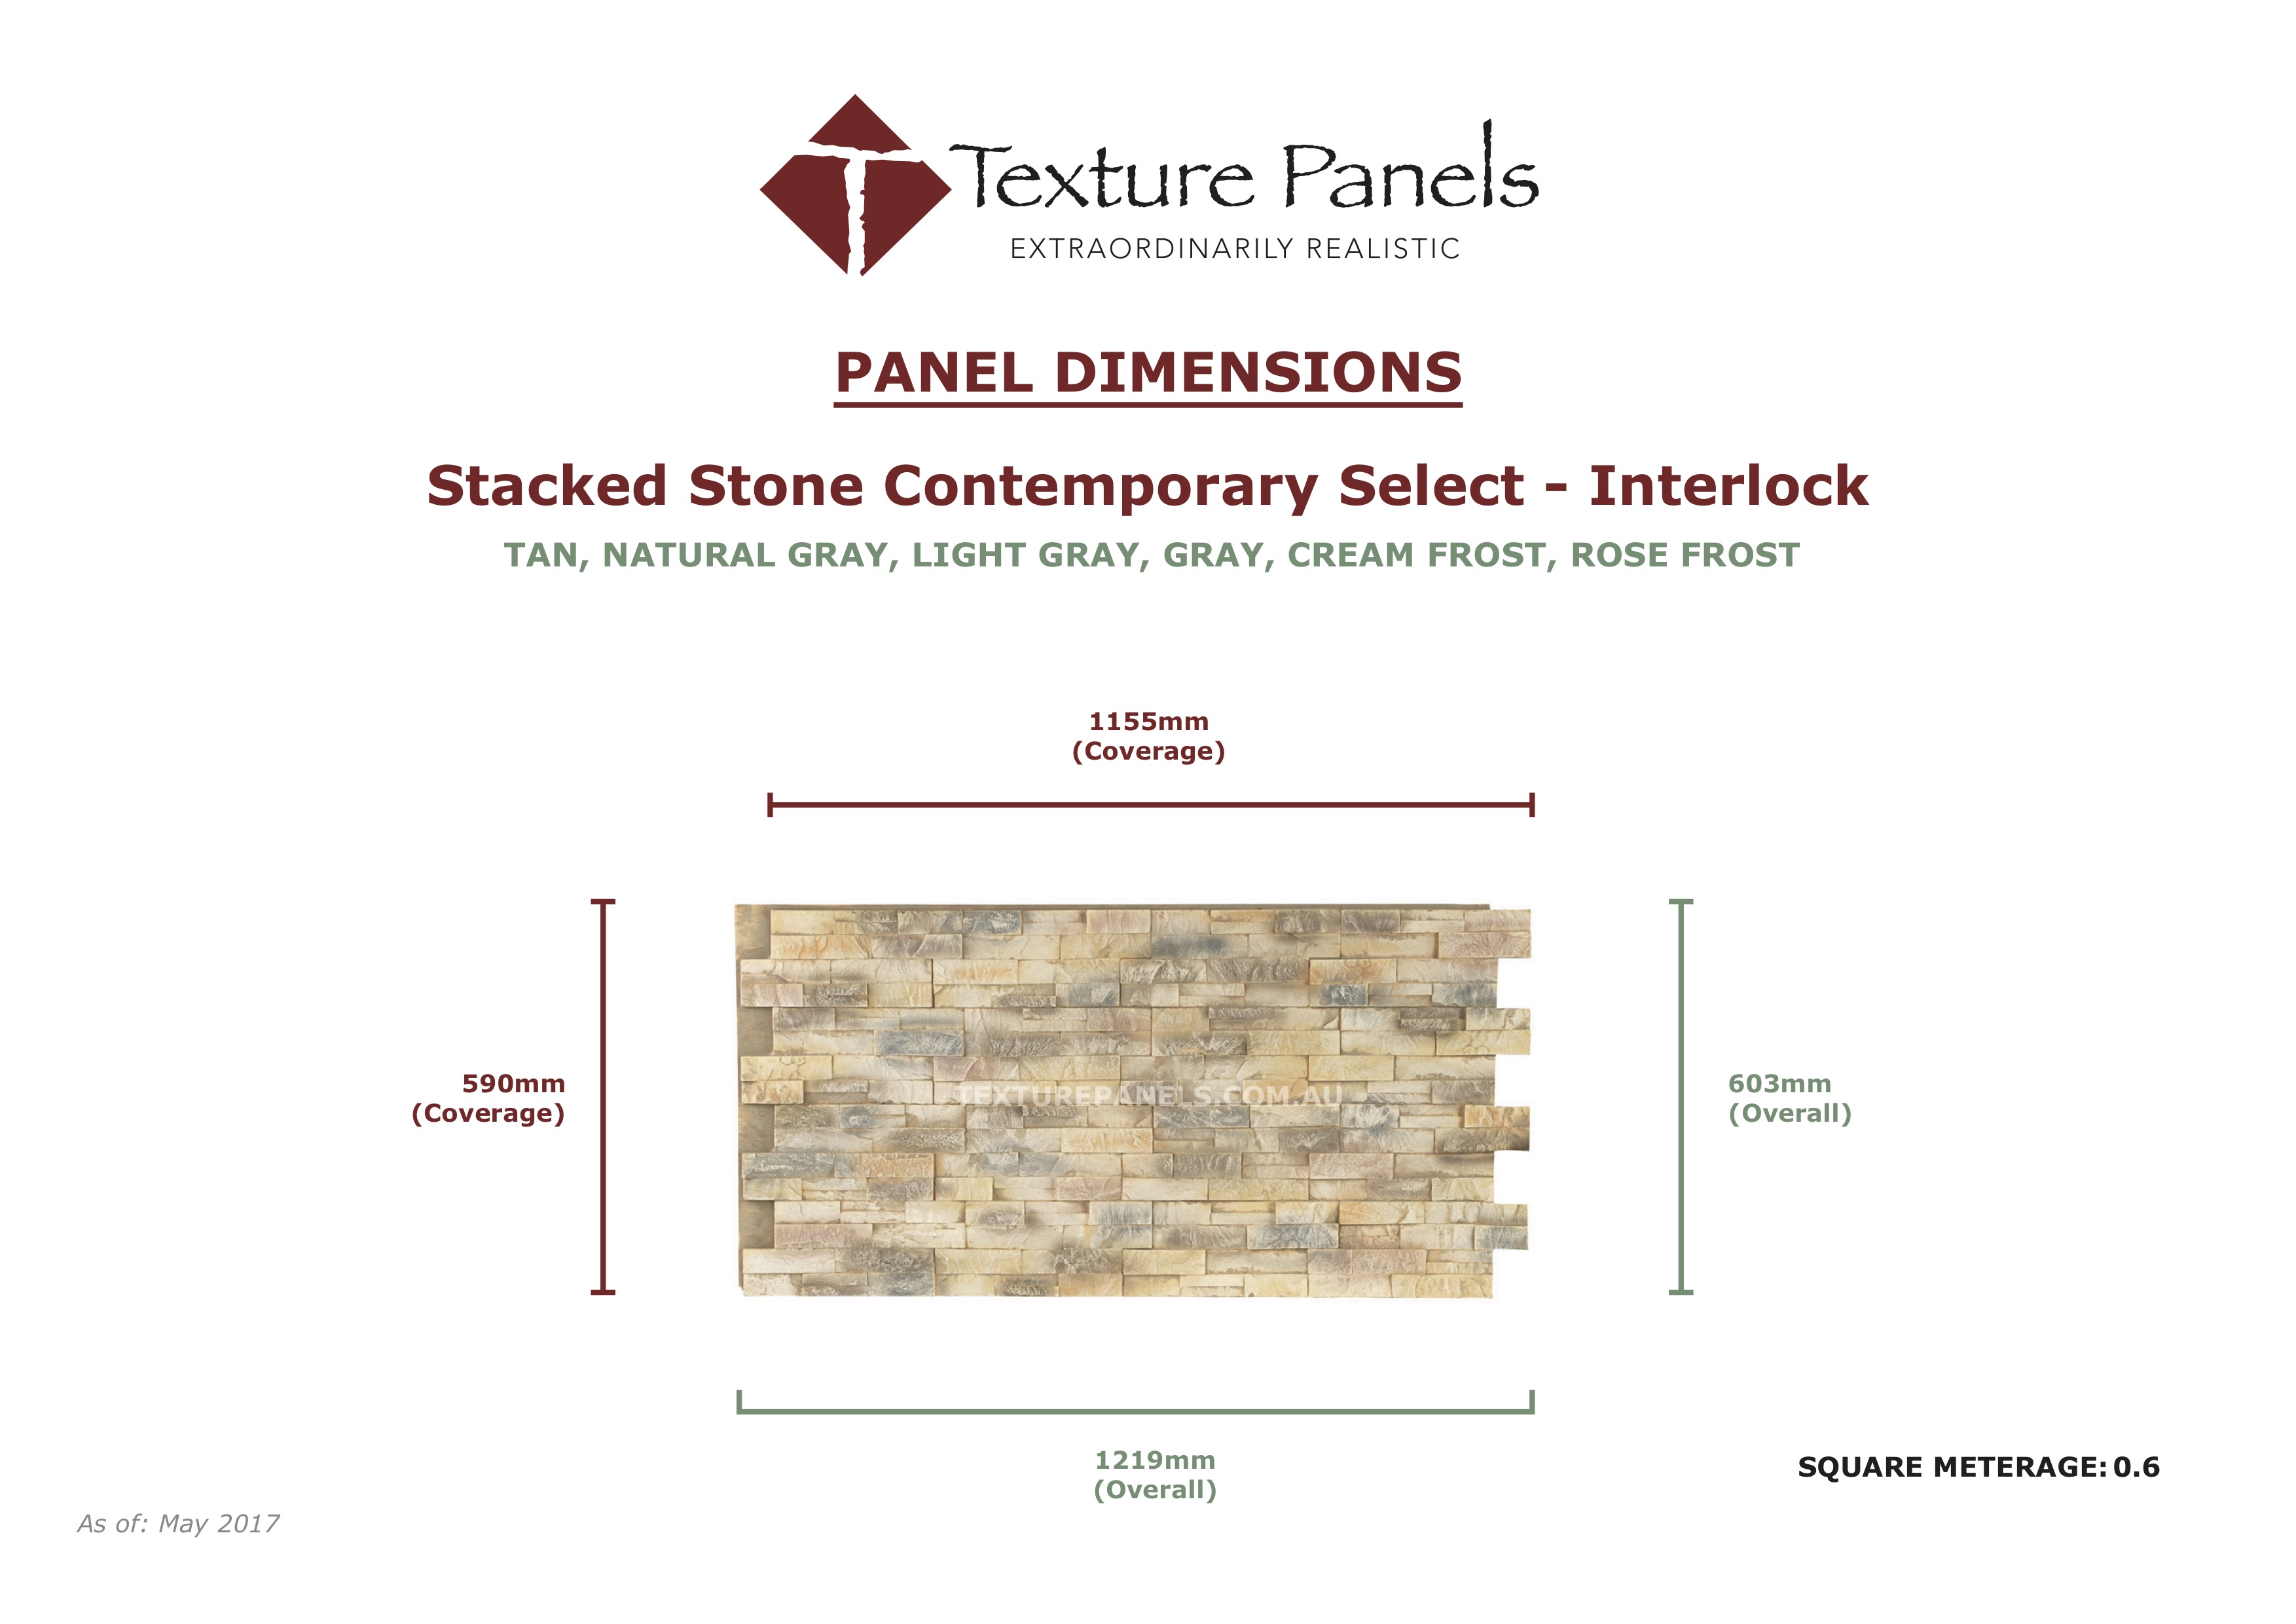 Stacked Stone Contemporary Interlock - Primed/Unfinished Dimensions